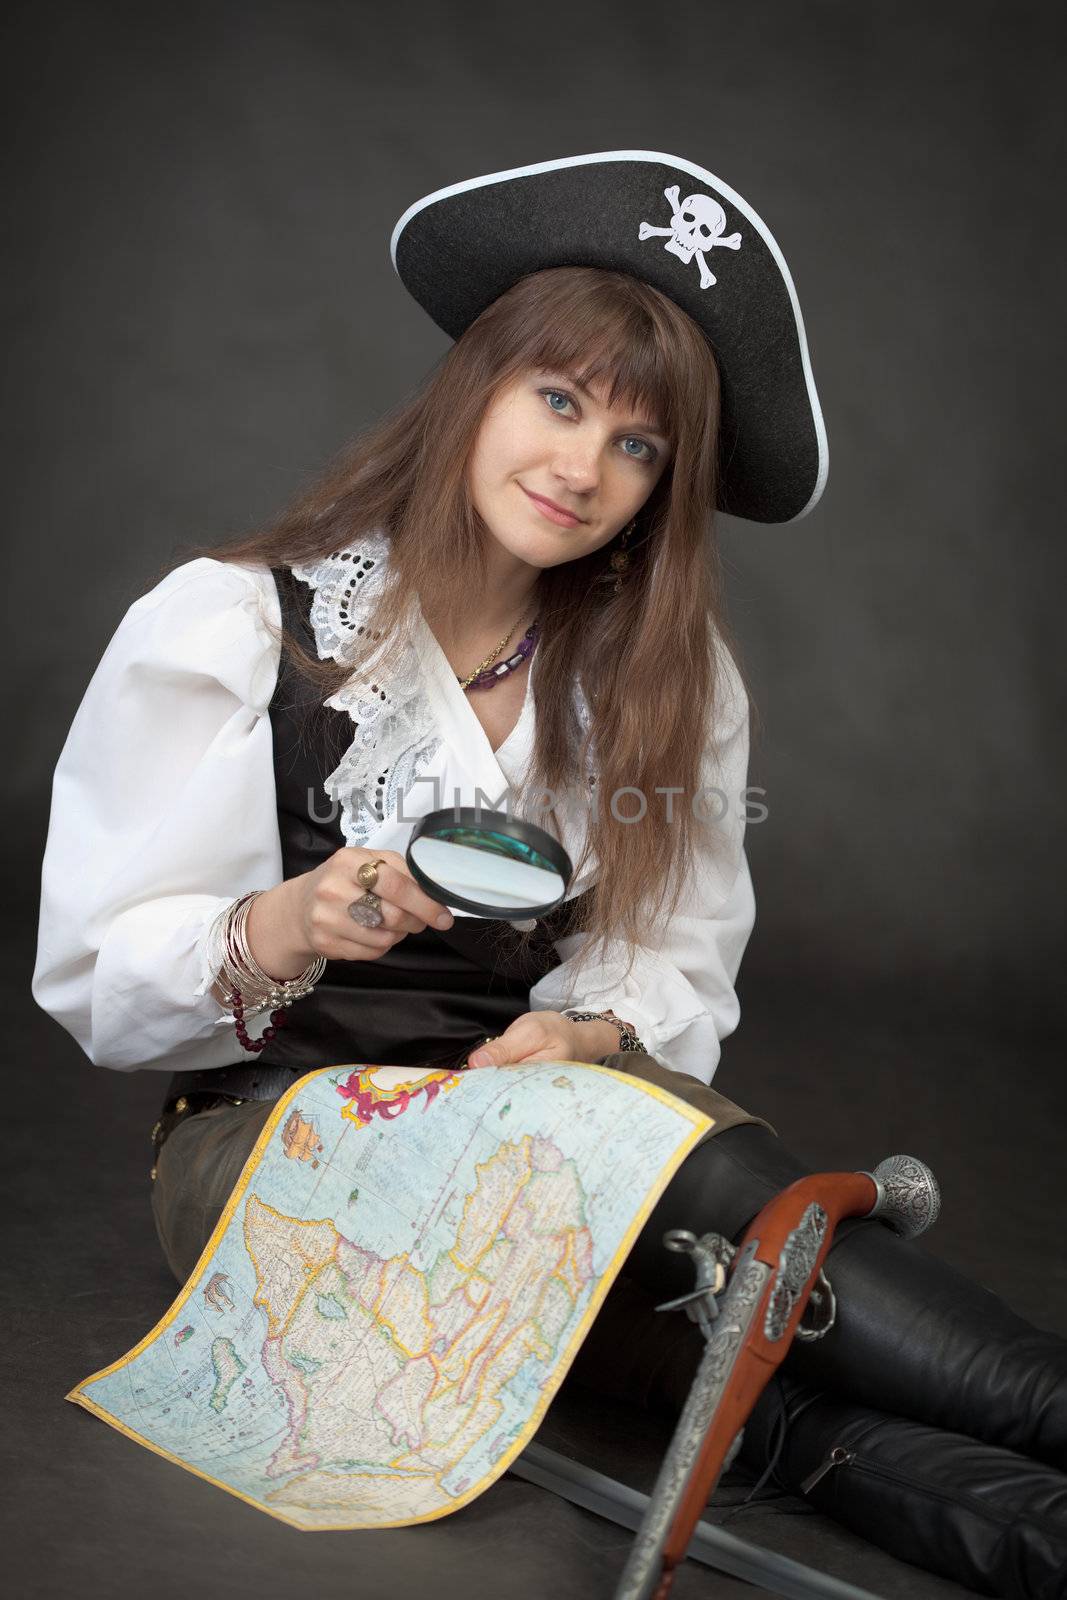 Pirate girl with sea map and pistol sit on a black background